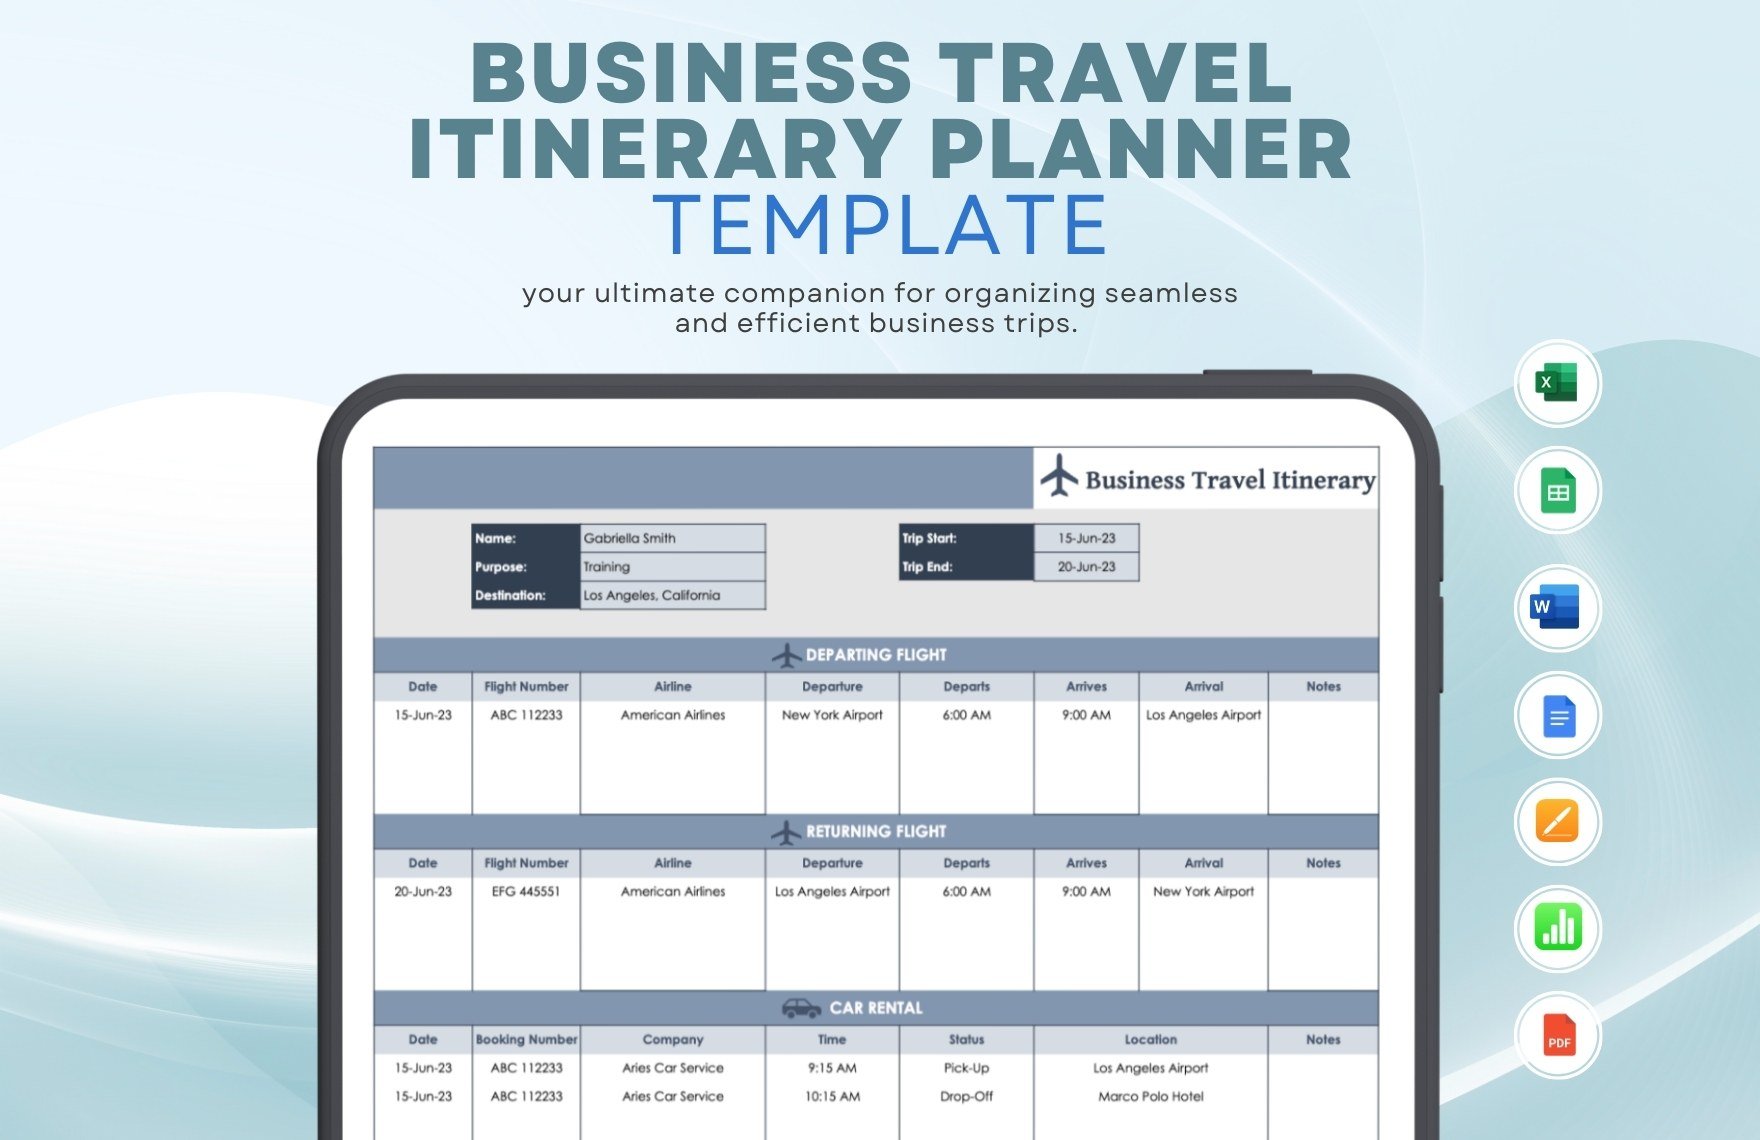 Business Travel Itinerary Planner Template in Word, Google Docs, Excel, PDF, Google Sheets, Apple Pages, Apple Numbers